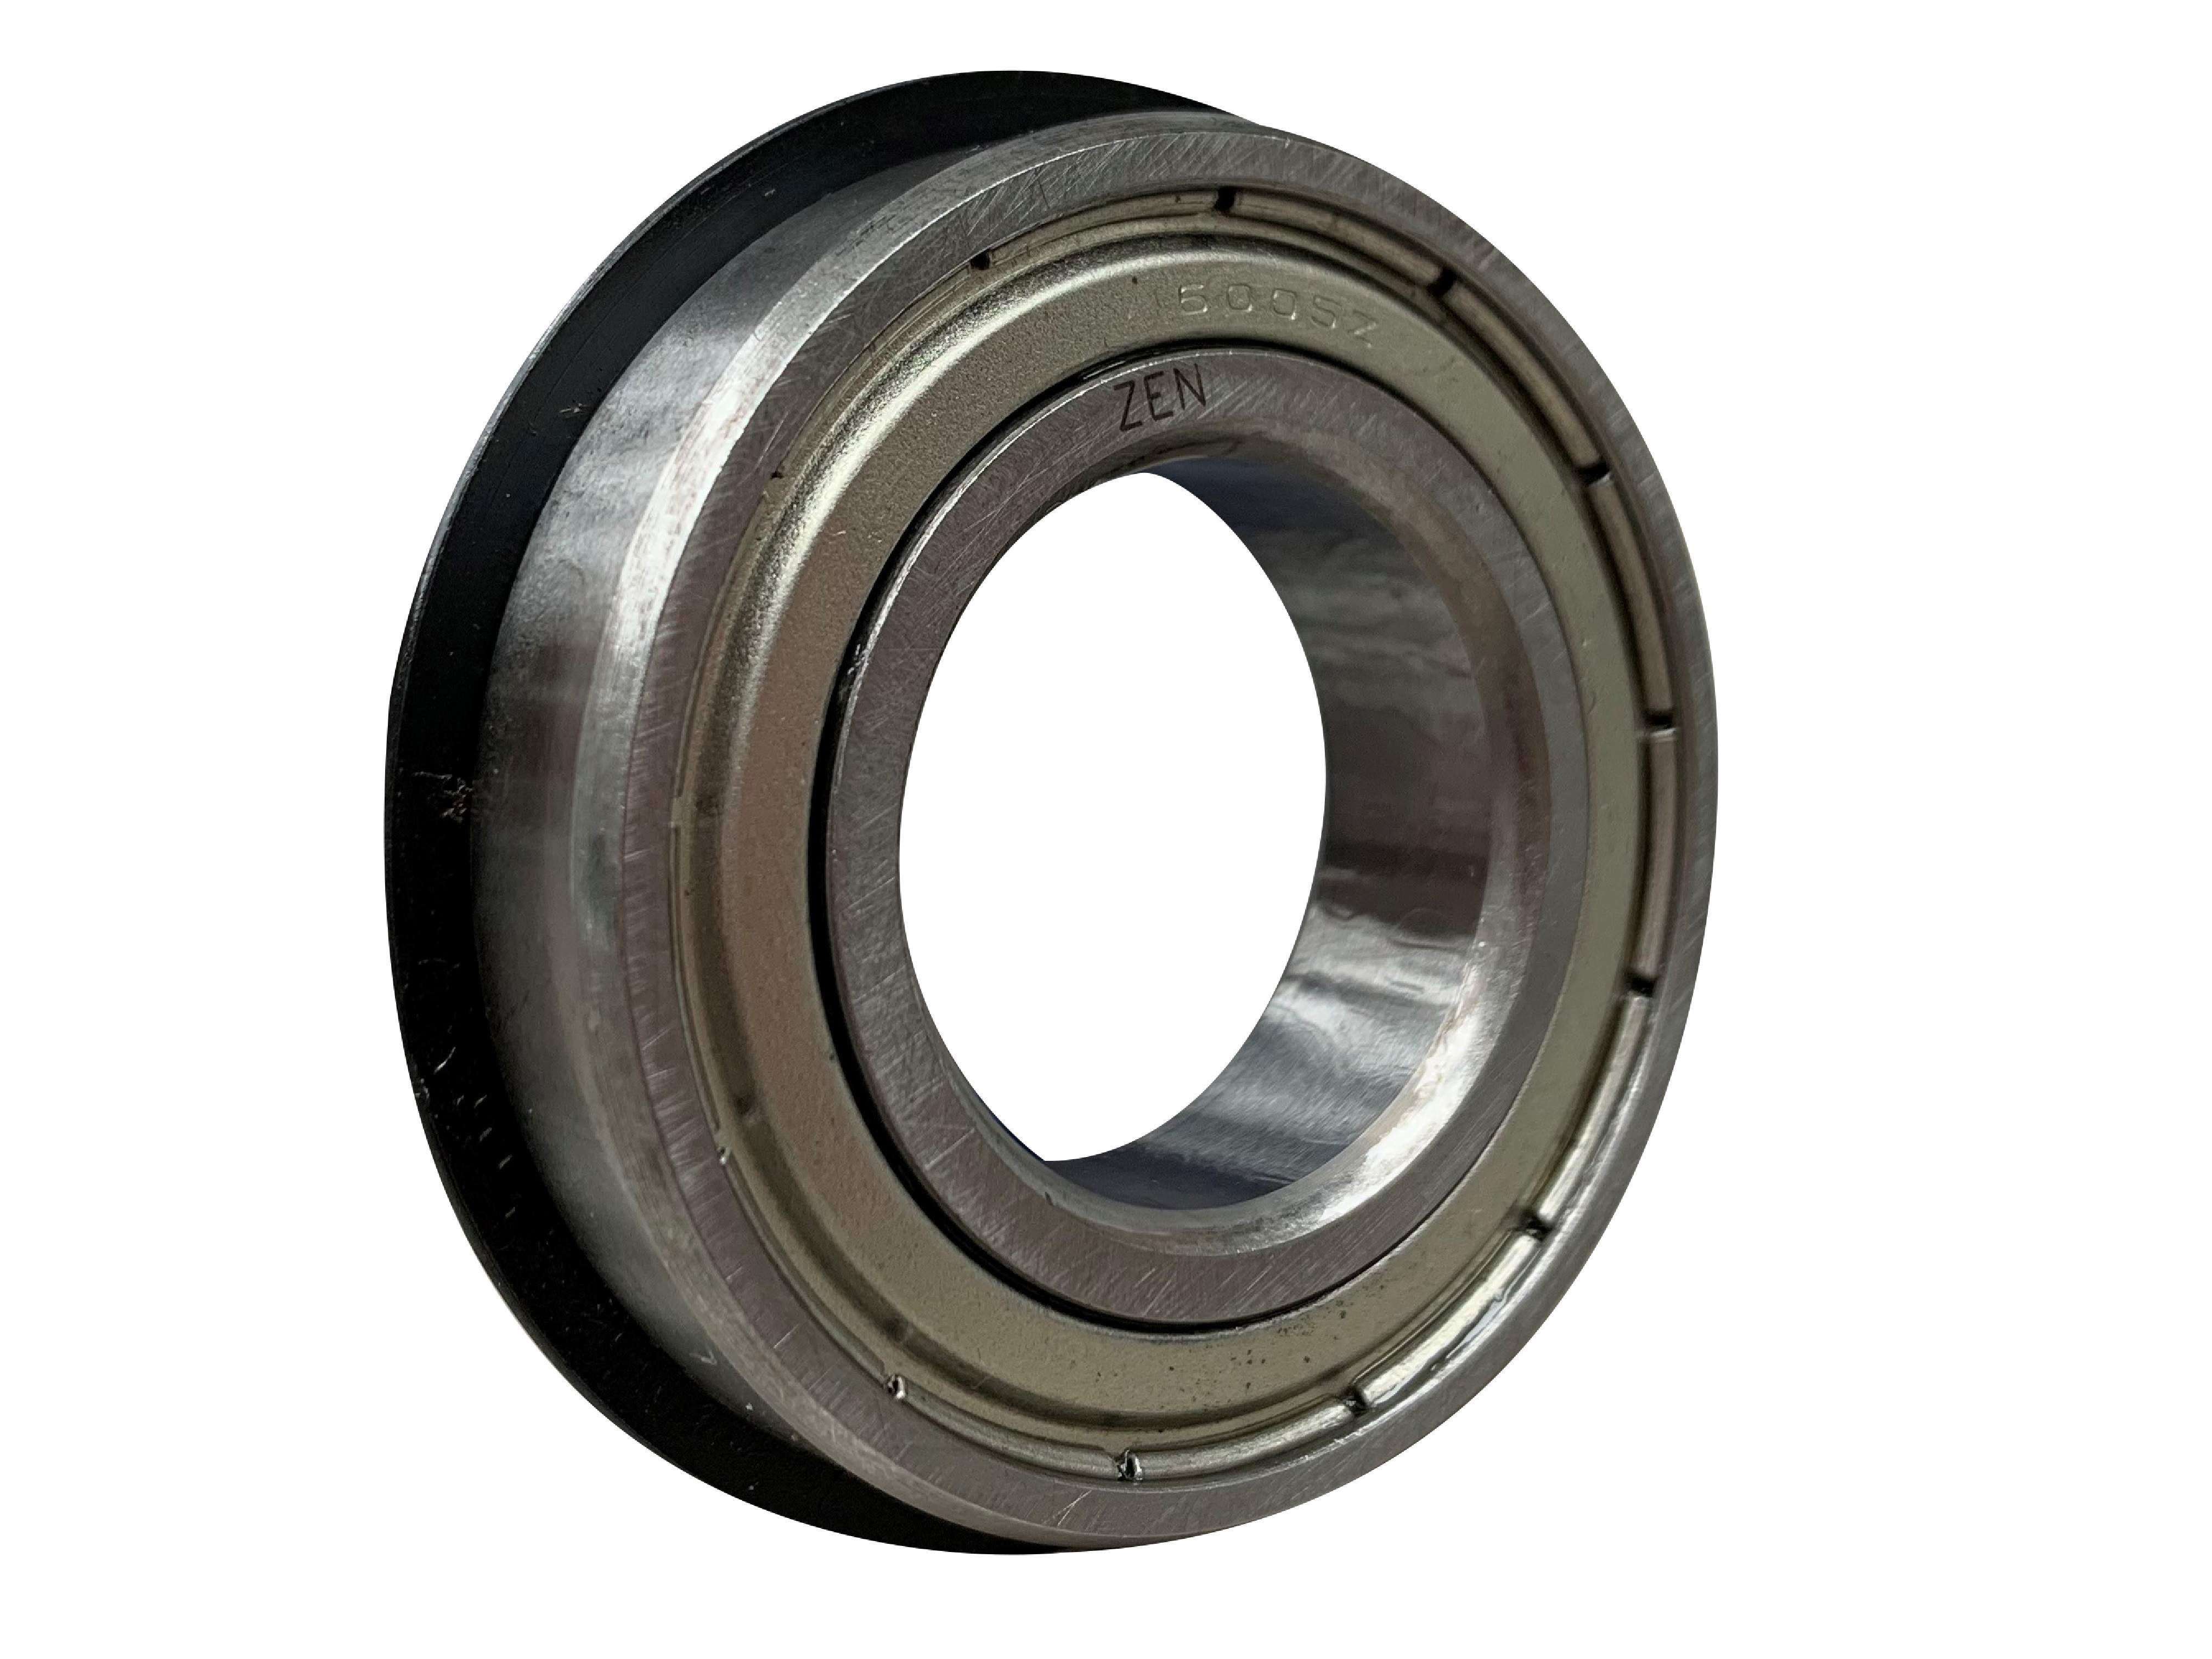 ZEN 6303-2Z-NR Shielded Ball Bearing With Snap Ring 17mm x 47mm x 14mm